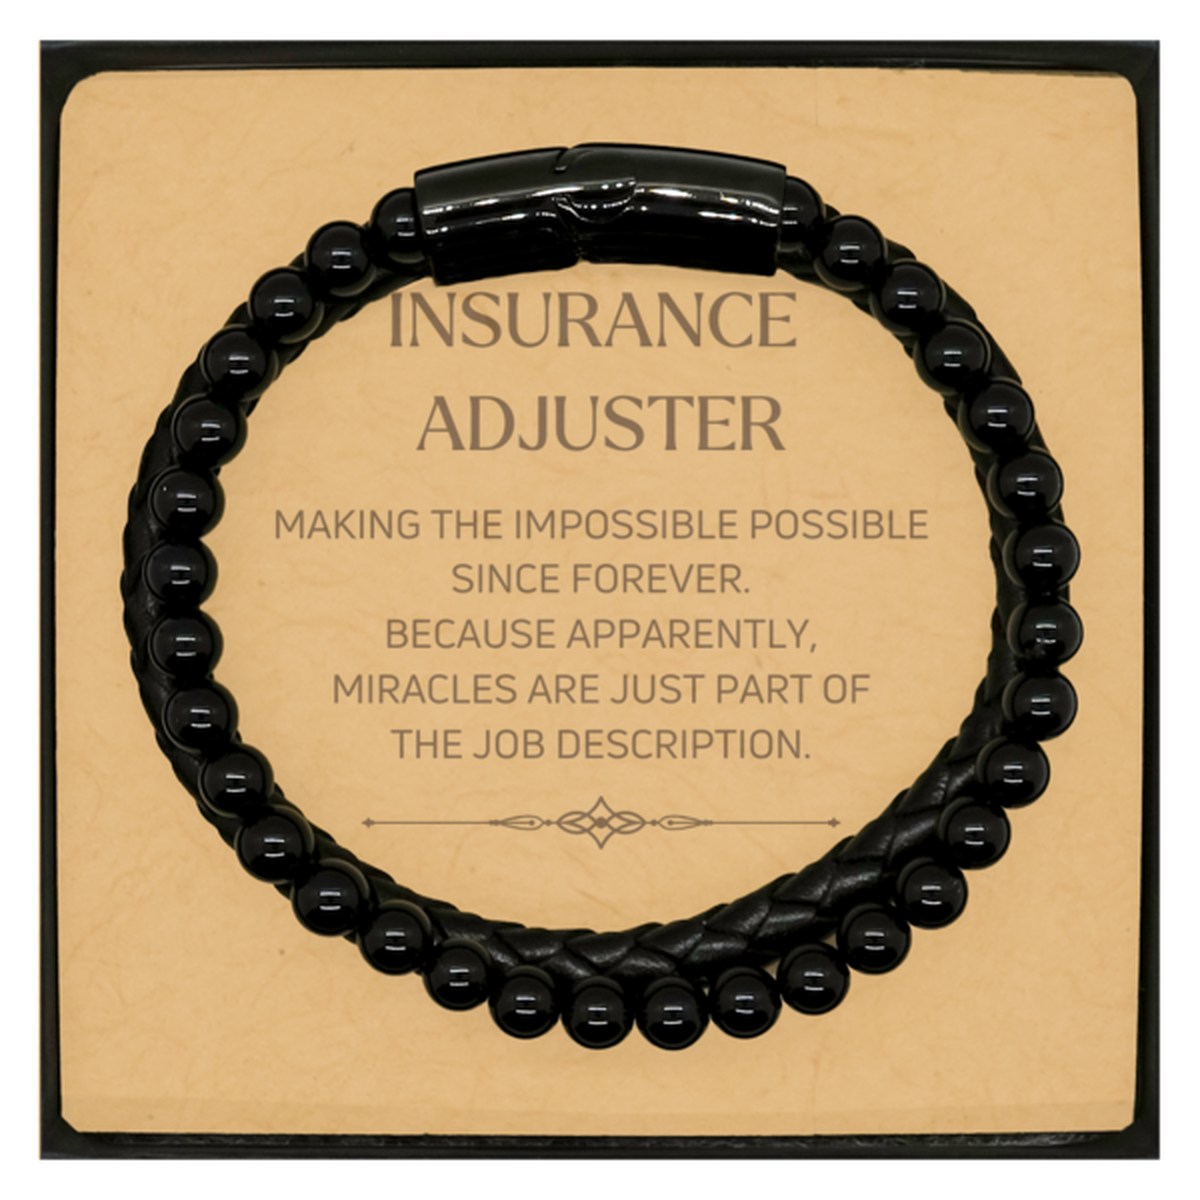 Funny Insurance Adjuster Gifts, Miracles are just part of the job description, Inspirational Birthday Christmas Stone Leather Bracelets For Insurance Adjuster, Men, Women, Coworkers, Friends, Boss